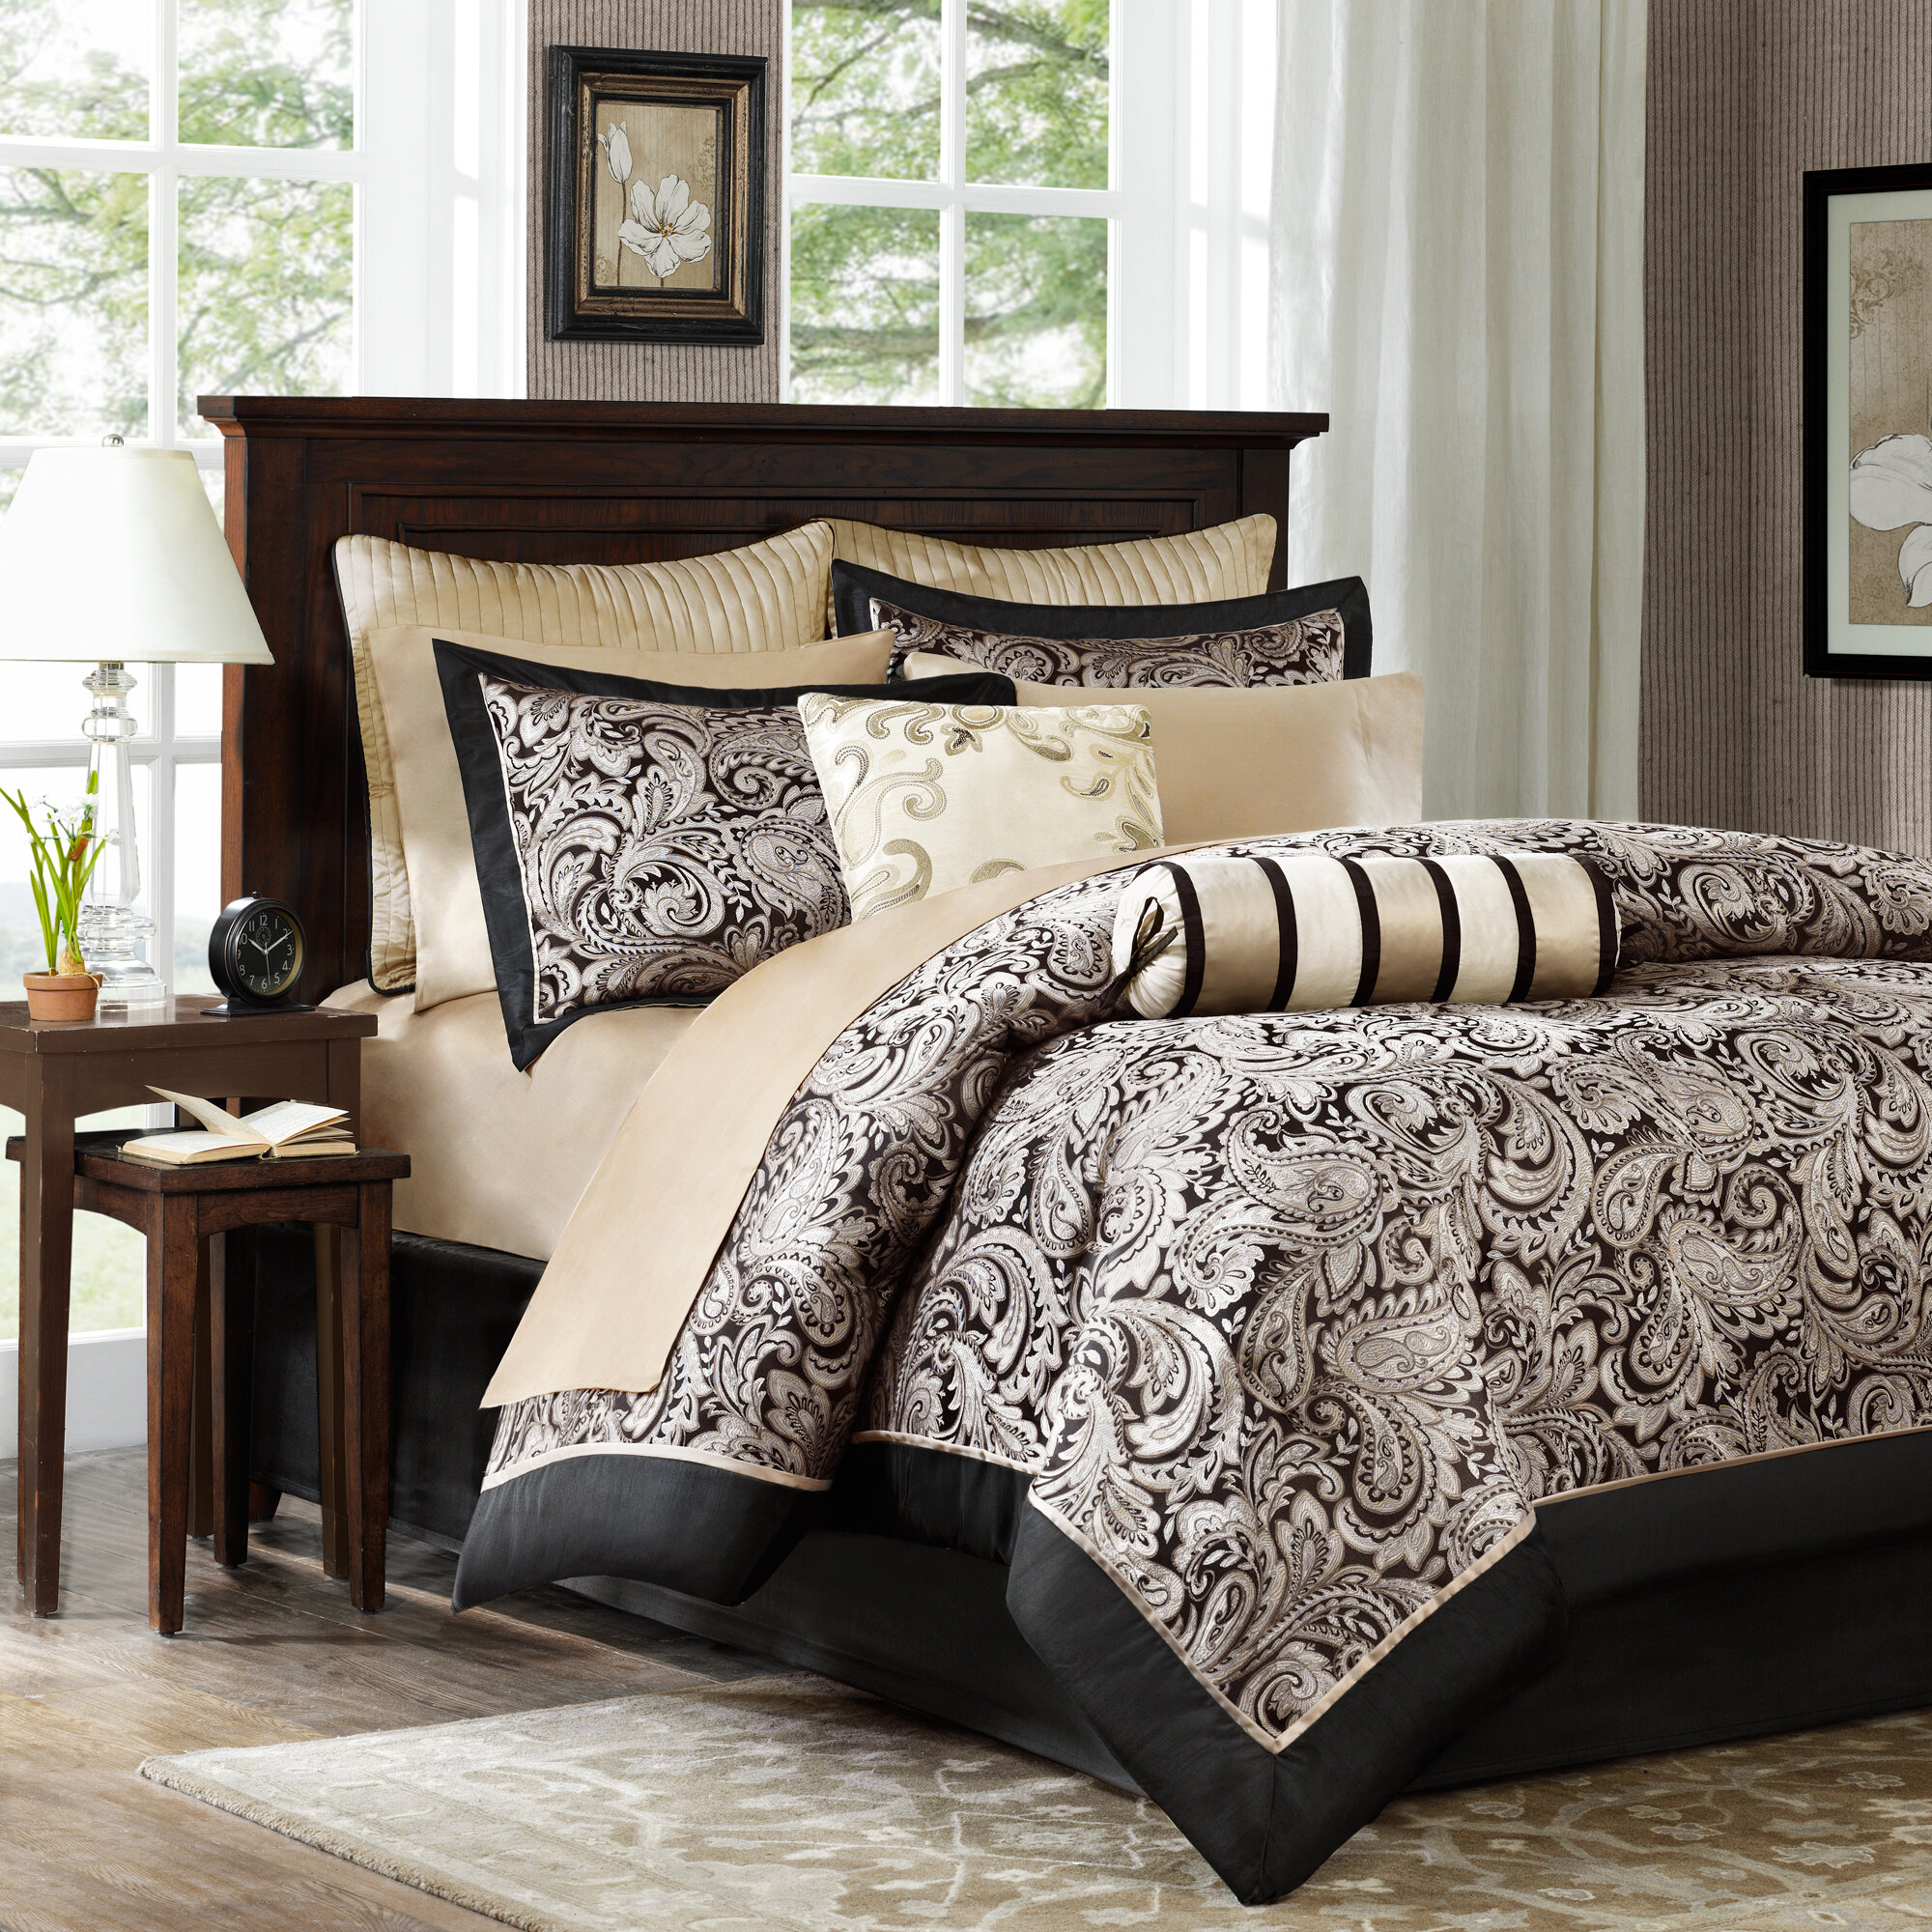 12-Piece Comforter Sets on sale for $35.99 at Macy’s.